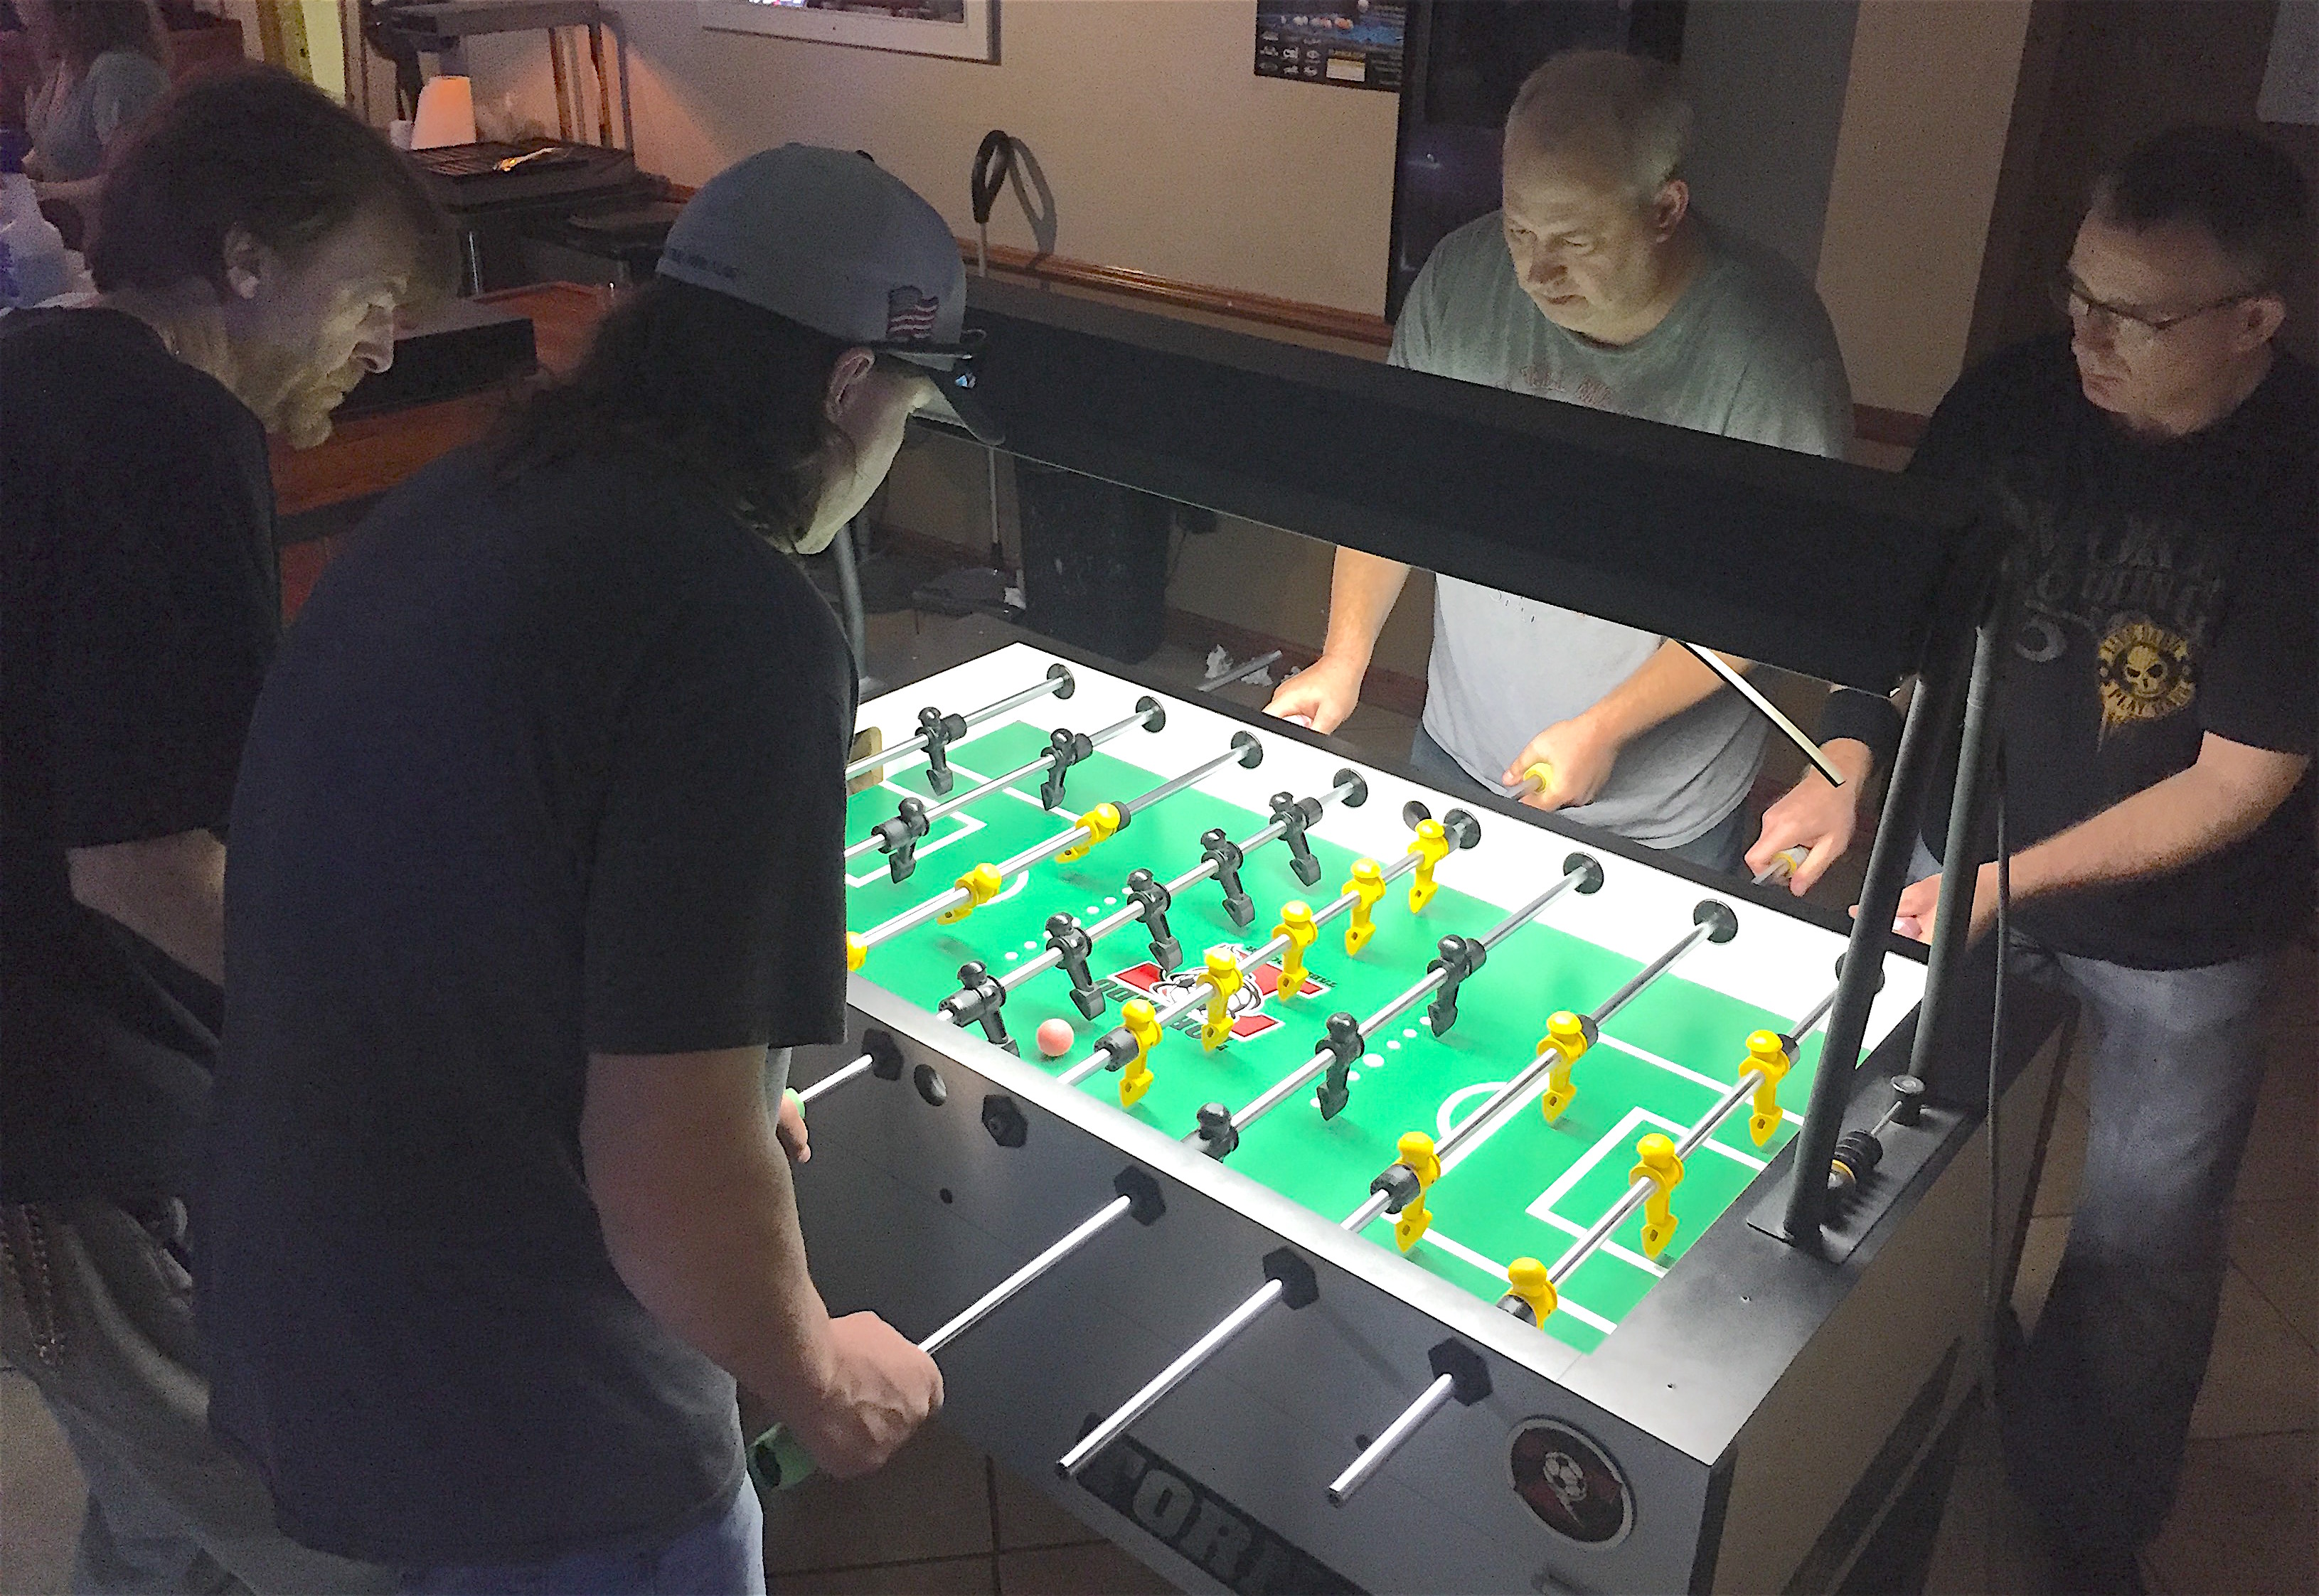 A match for 2nd place or better of open doubles competition at the North Alabama Open foosball tournament held at 6 Pockets Bar & Billiards in Decatur,AL., shown are players Todd Brooks & Bruce Stancil vs Mickey Munger & Wayne Patrick.